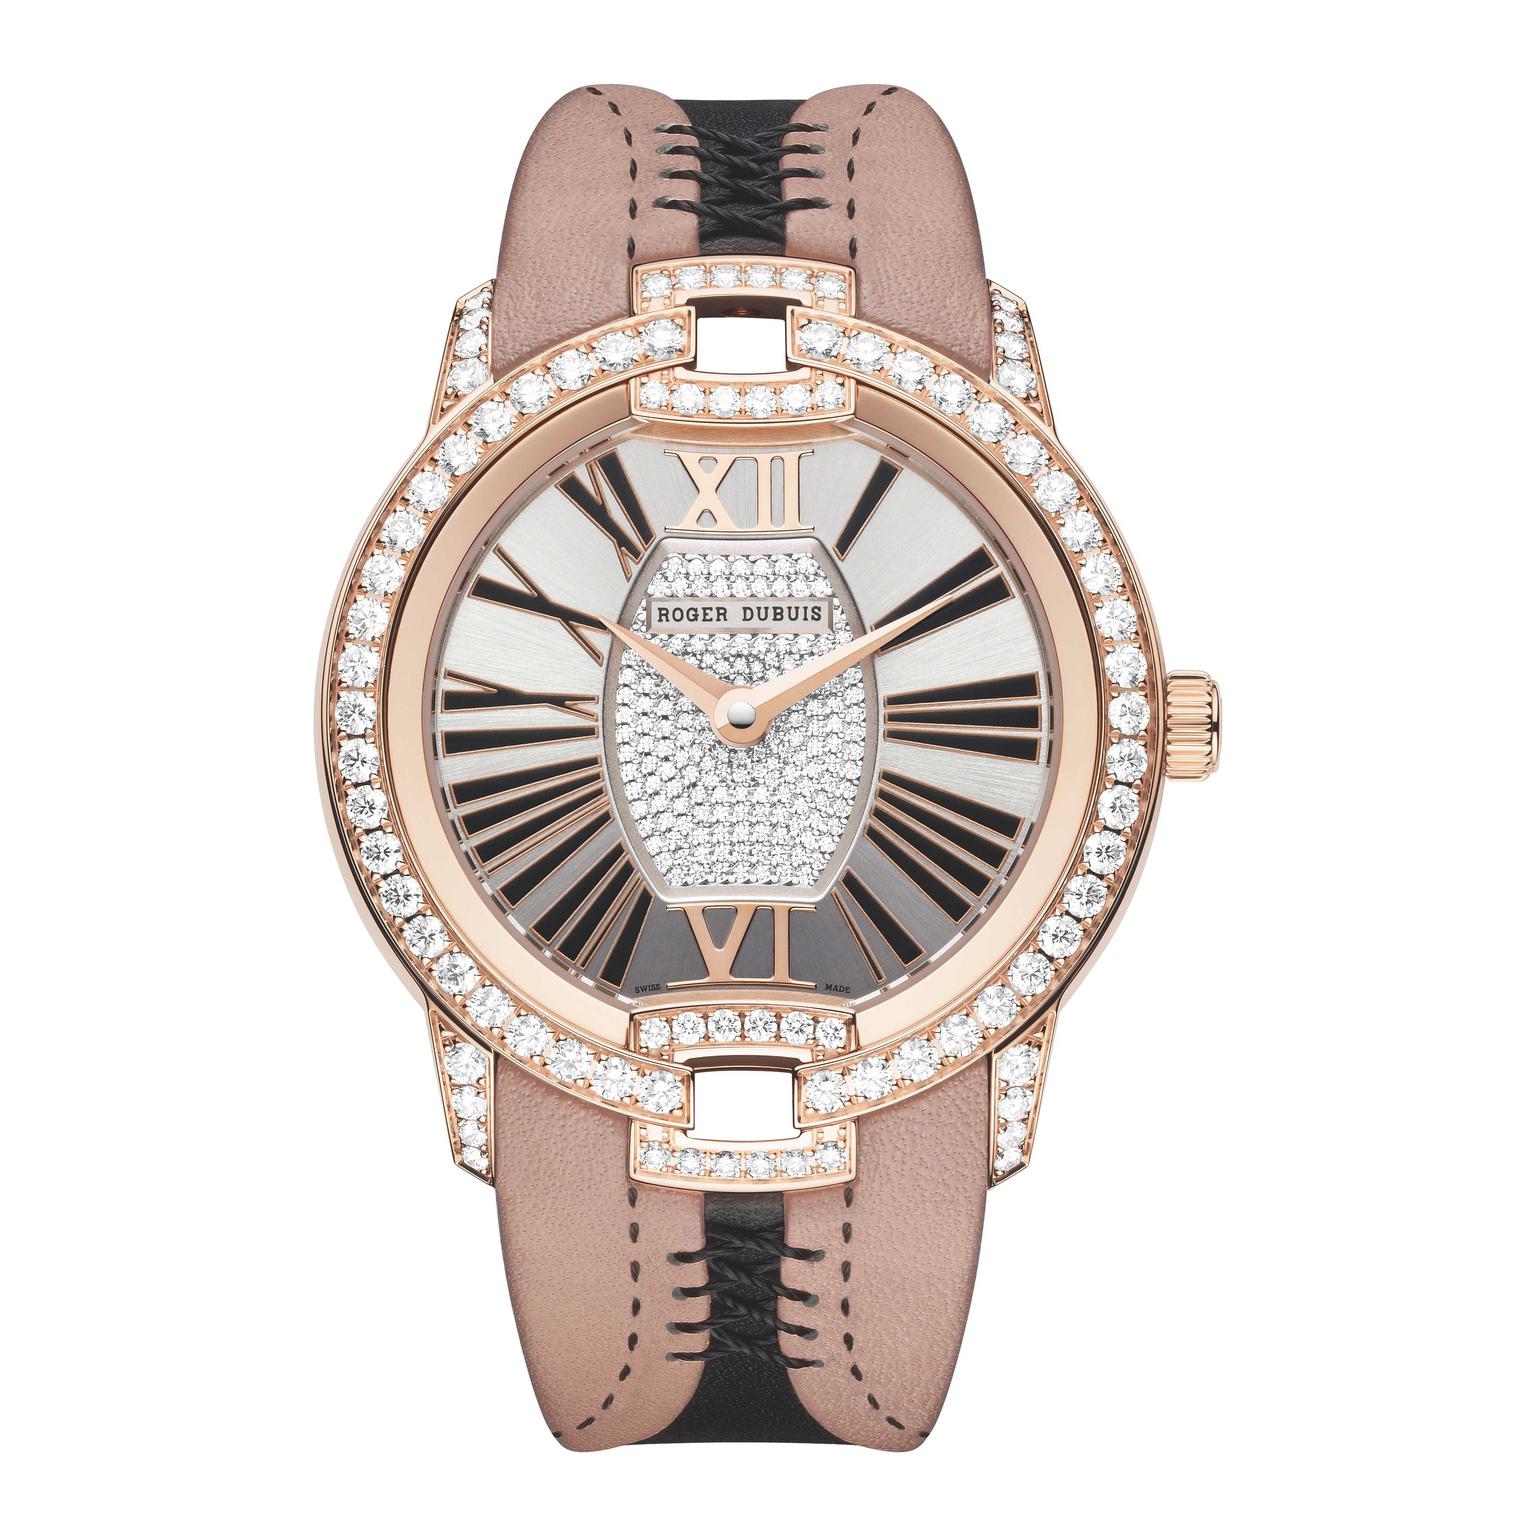 Roger-Dubuis-corset-watch